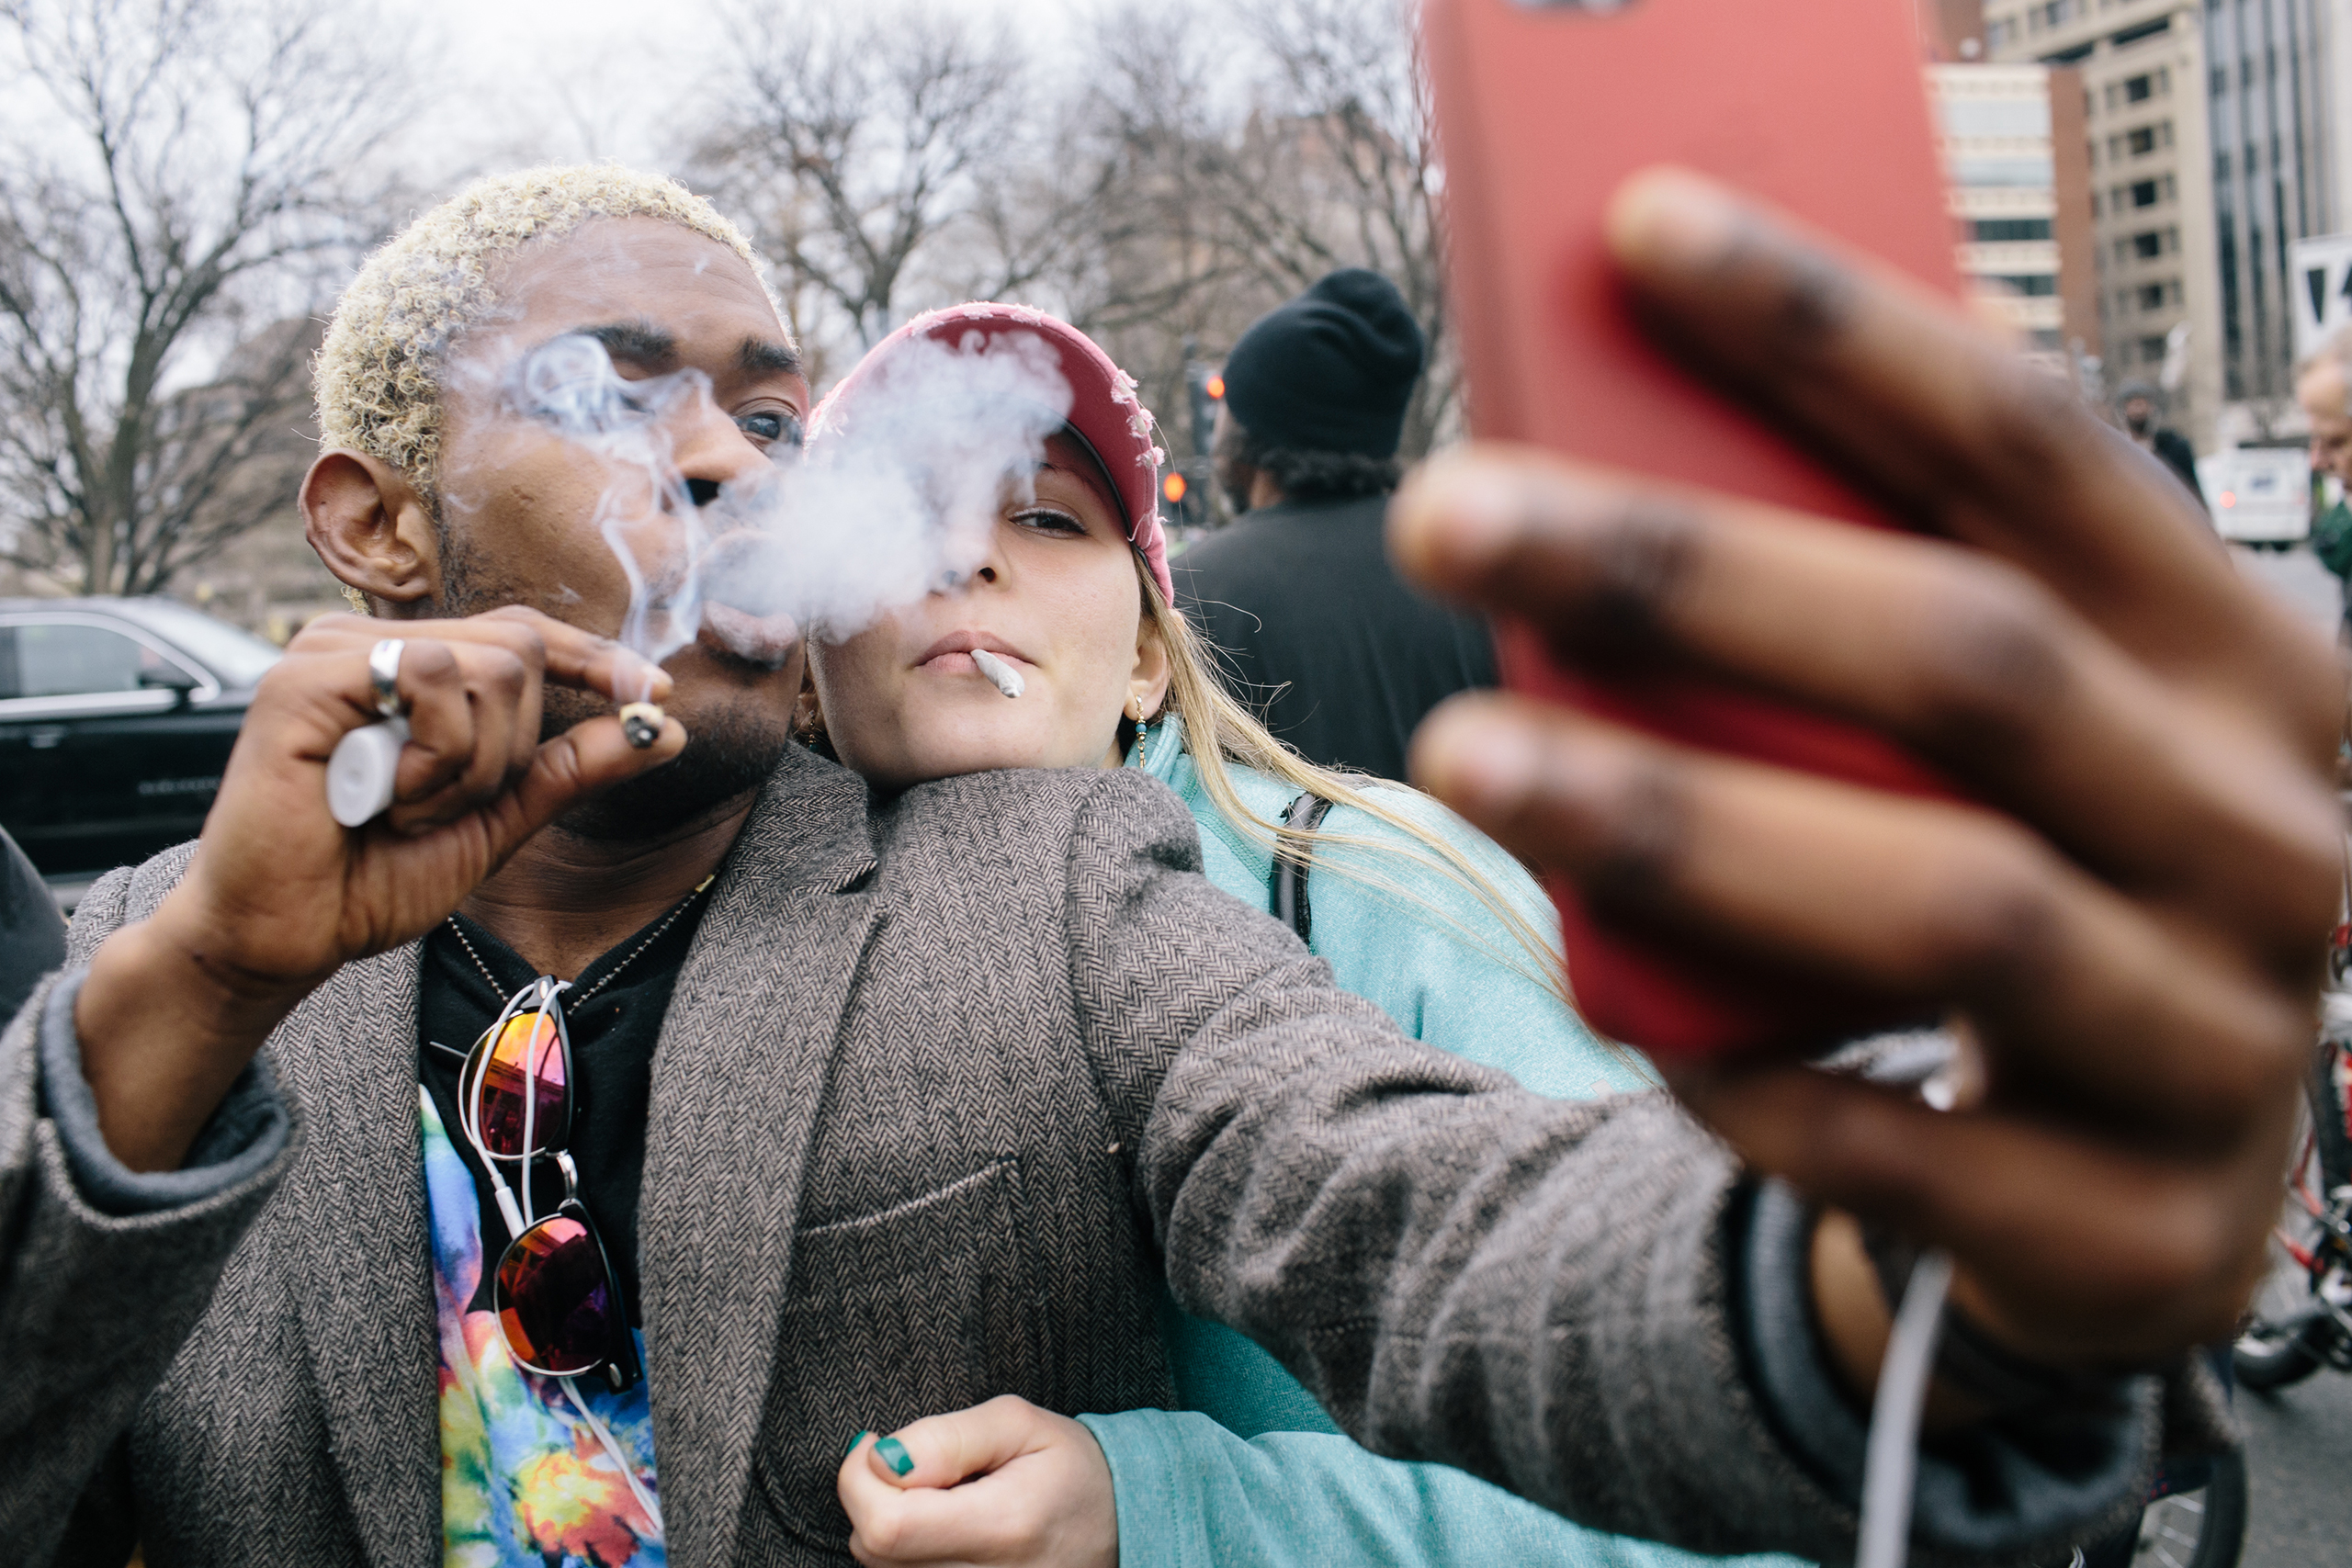 Giovanni Gopaulsingh, 25, from Maryland, and Ariel Johnson, 25, from Washington, smoke joints as they take a selfie during #Trump420 in Washington on Jan. 20, 2017.